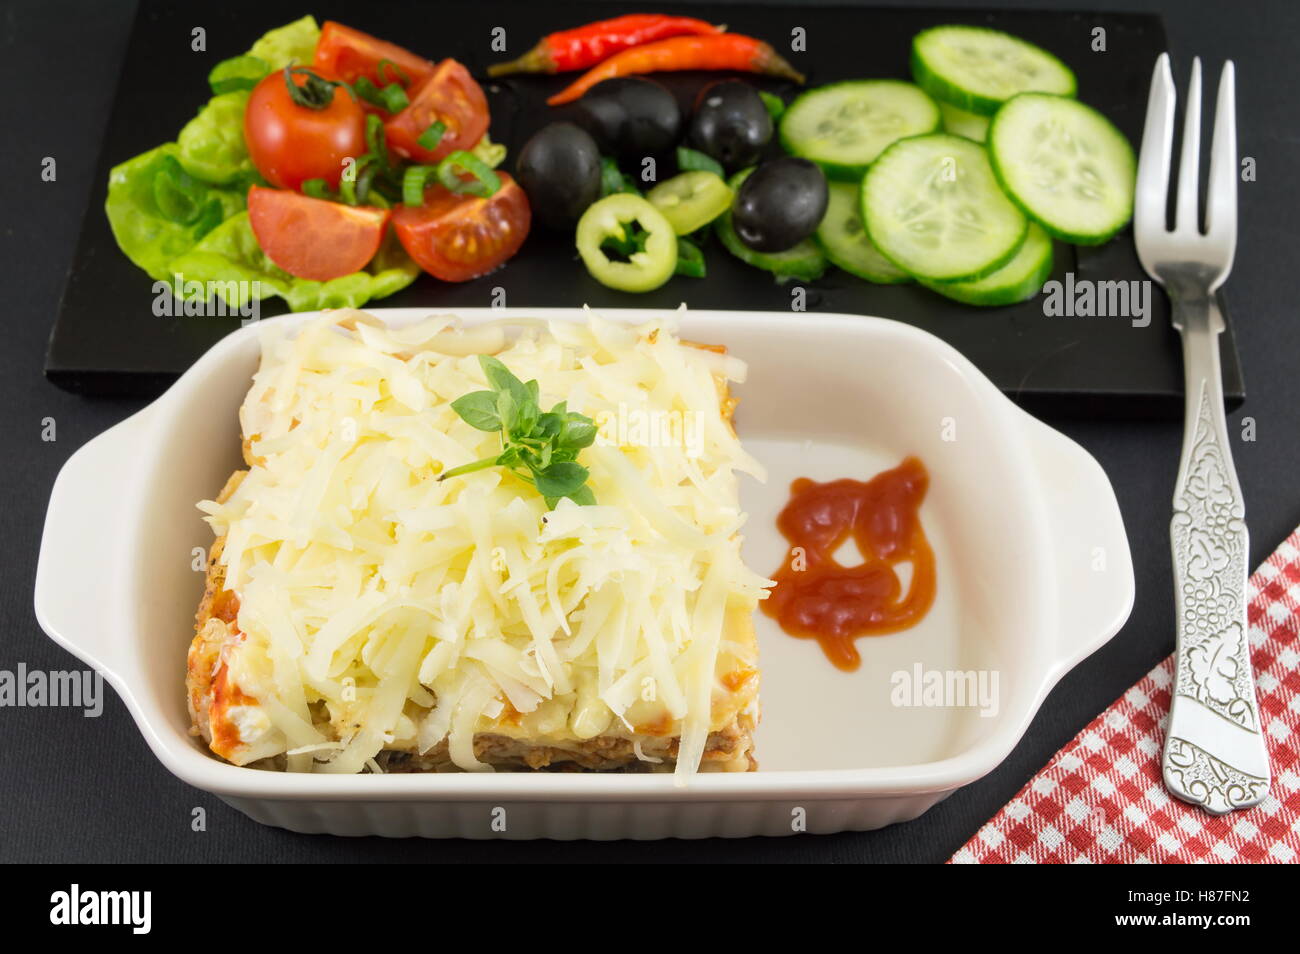 Lasagna portion with fresh vegetables on a plate Stock Photo